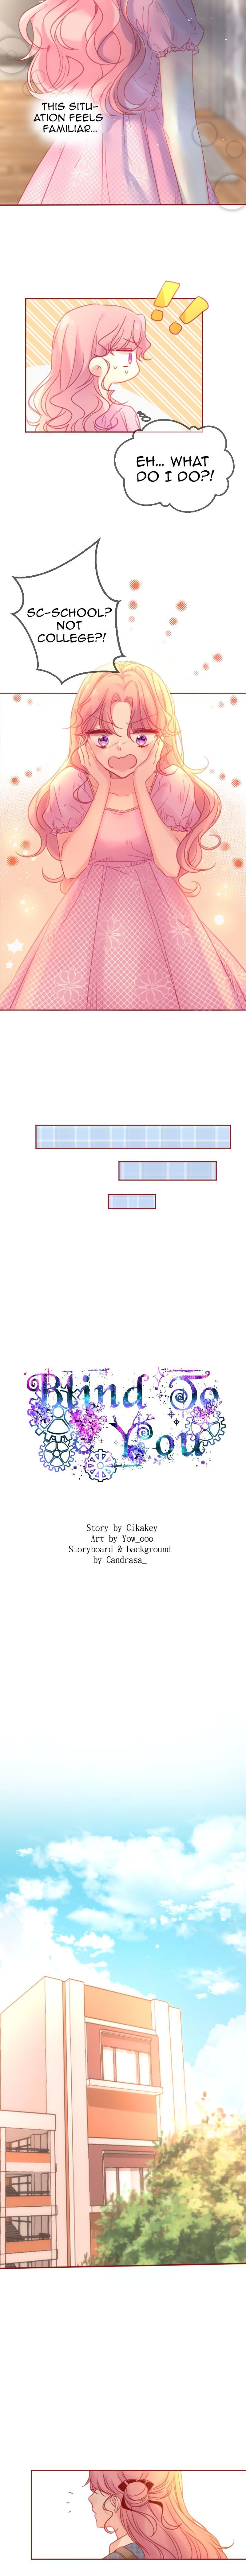 Blind To You - Page 2